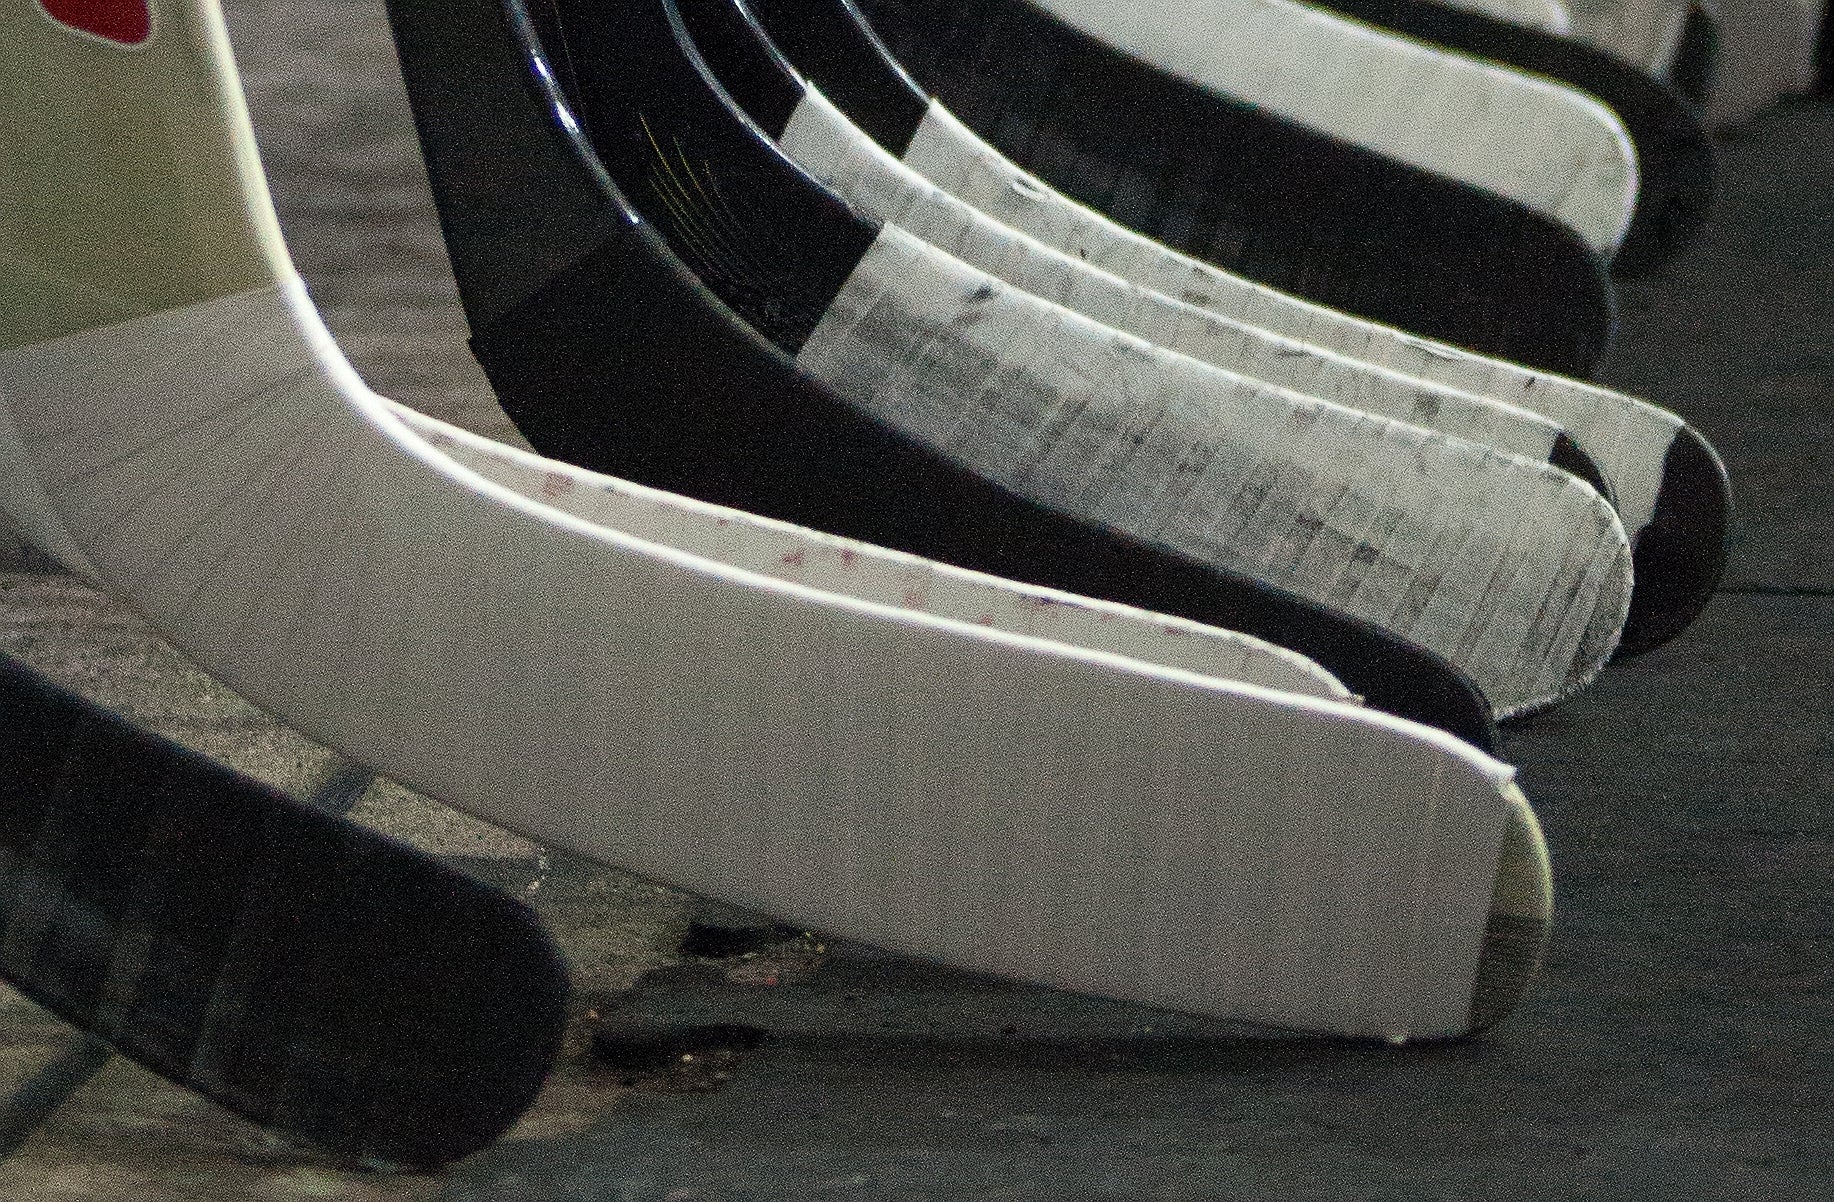 Tape Jobs: How to tape your stick like David Pastrnak 